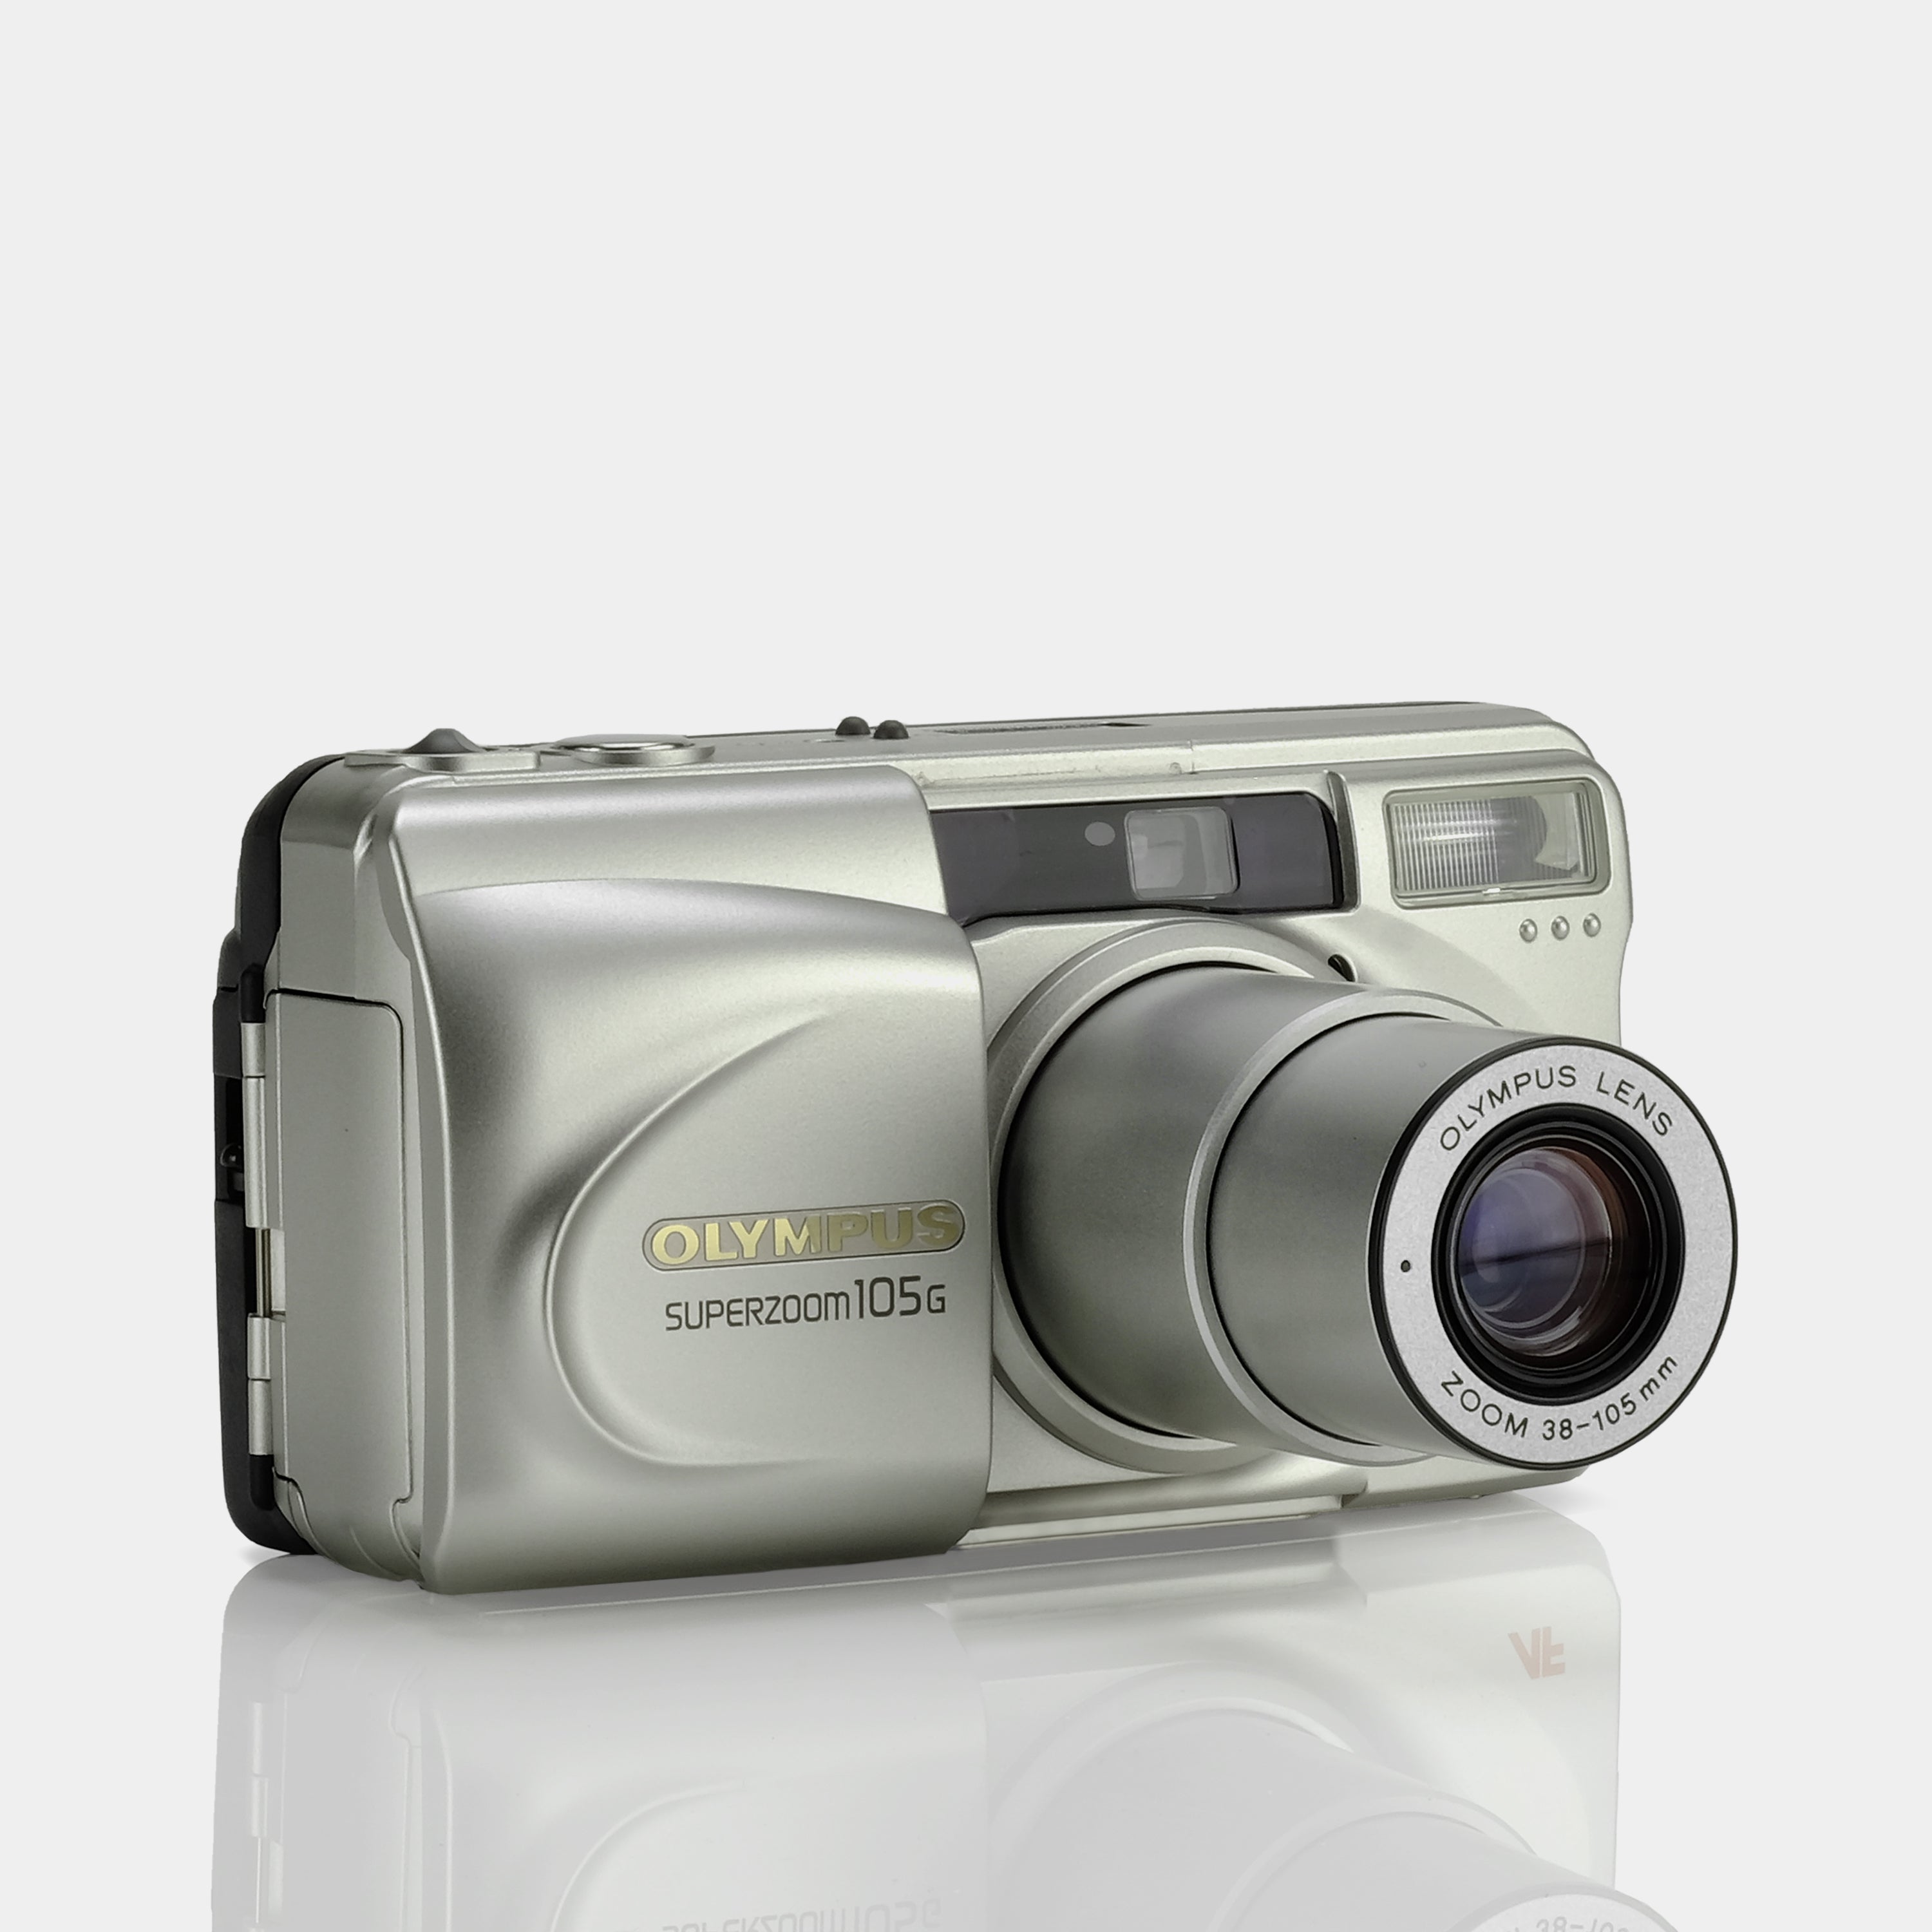 Olympus Superzoom 105G 35mm Point And Shoot Film Camera (New Old Stock)